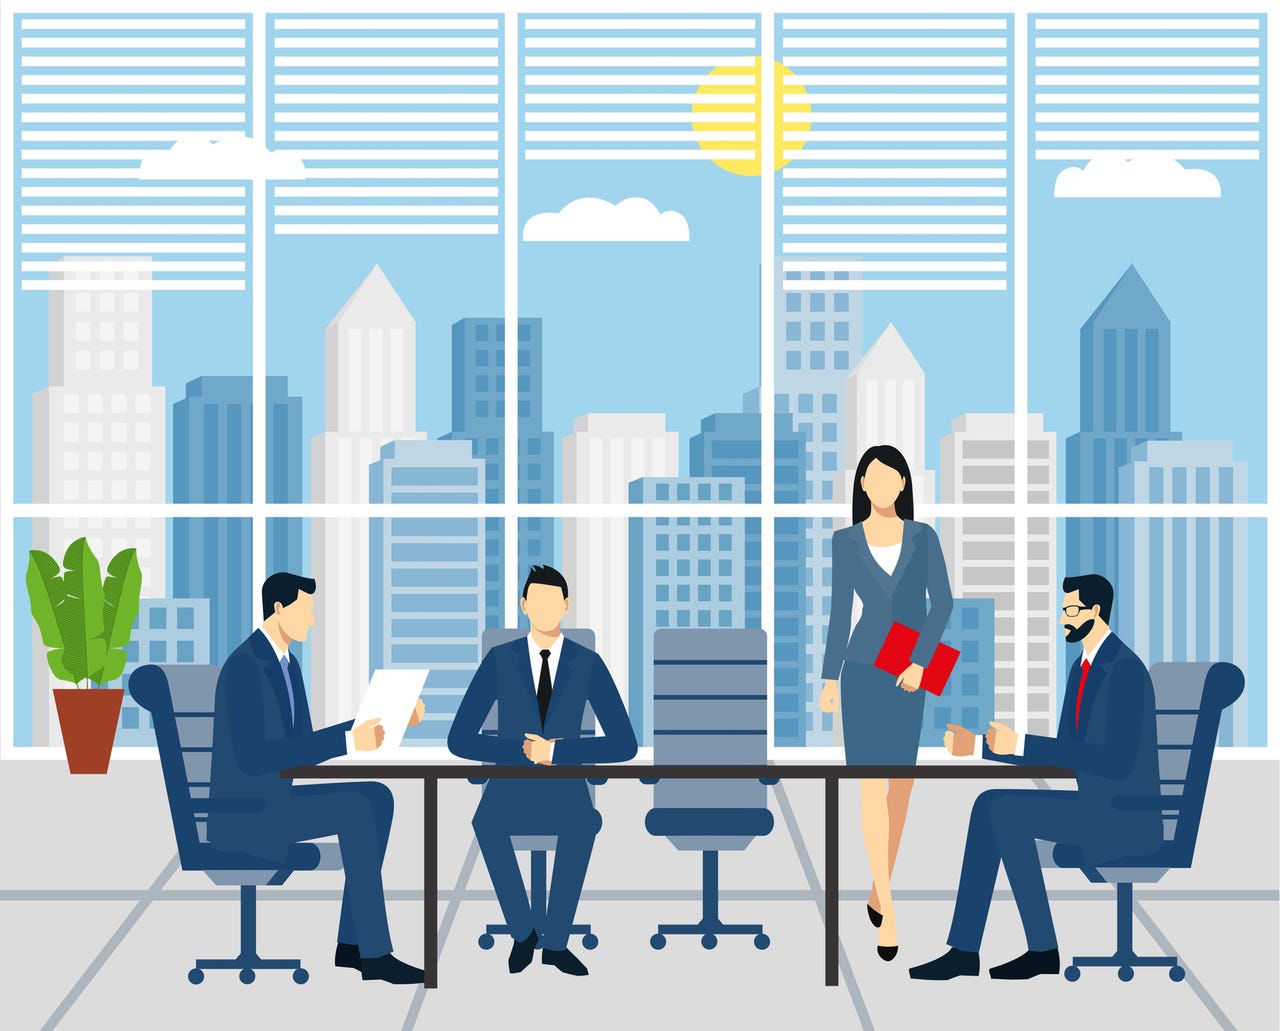 Stylized depiction of four businesspeople at an office table, one standing dynamically